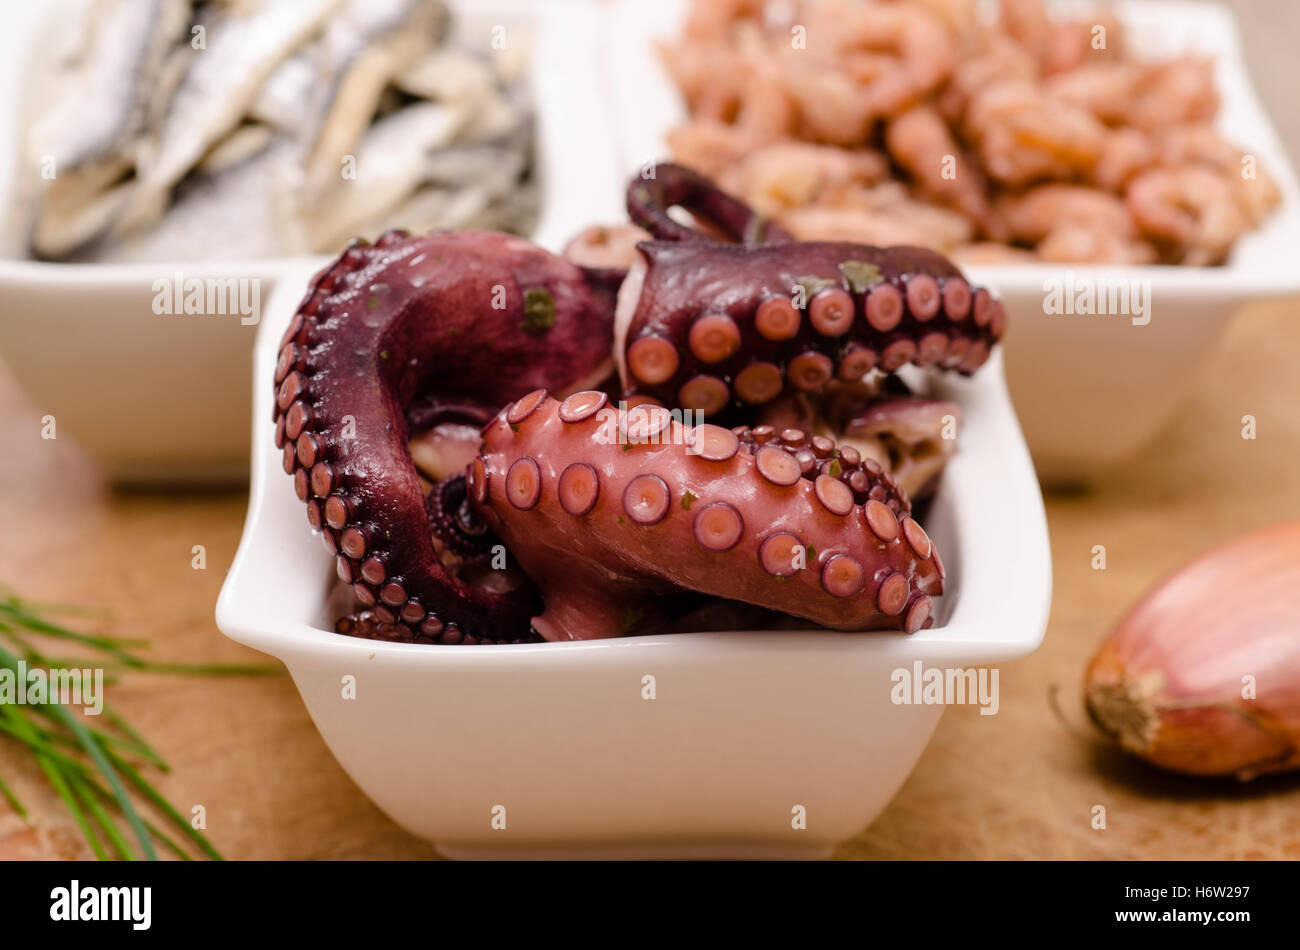 octopus ago sardines and shrimps Stock Photo